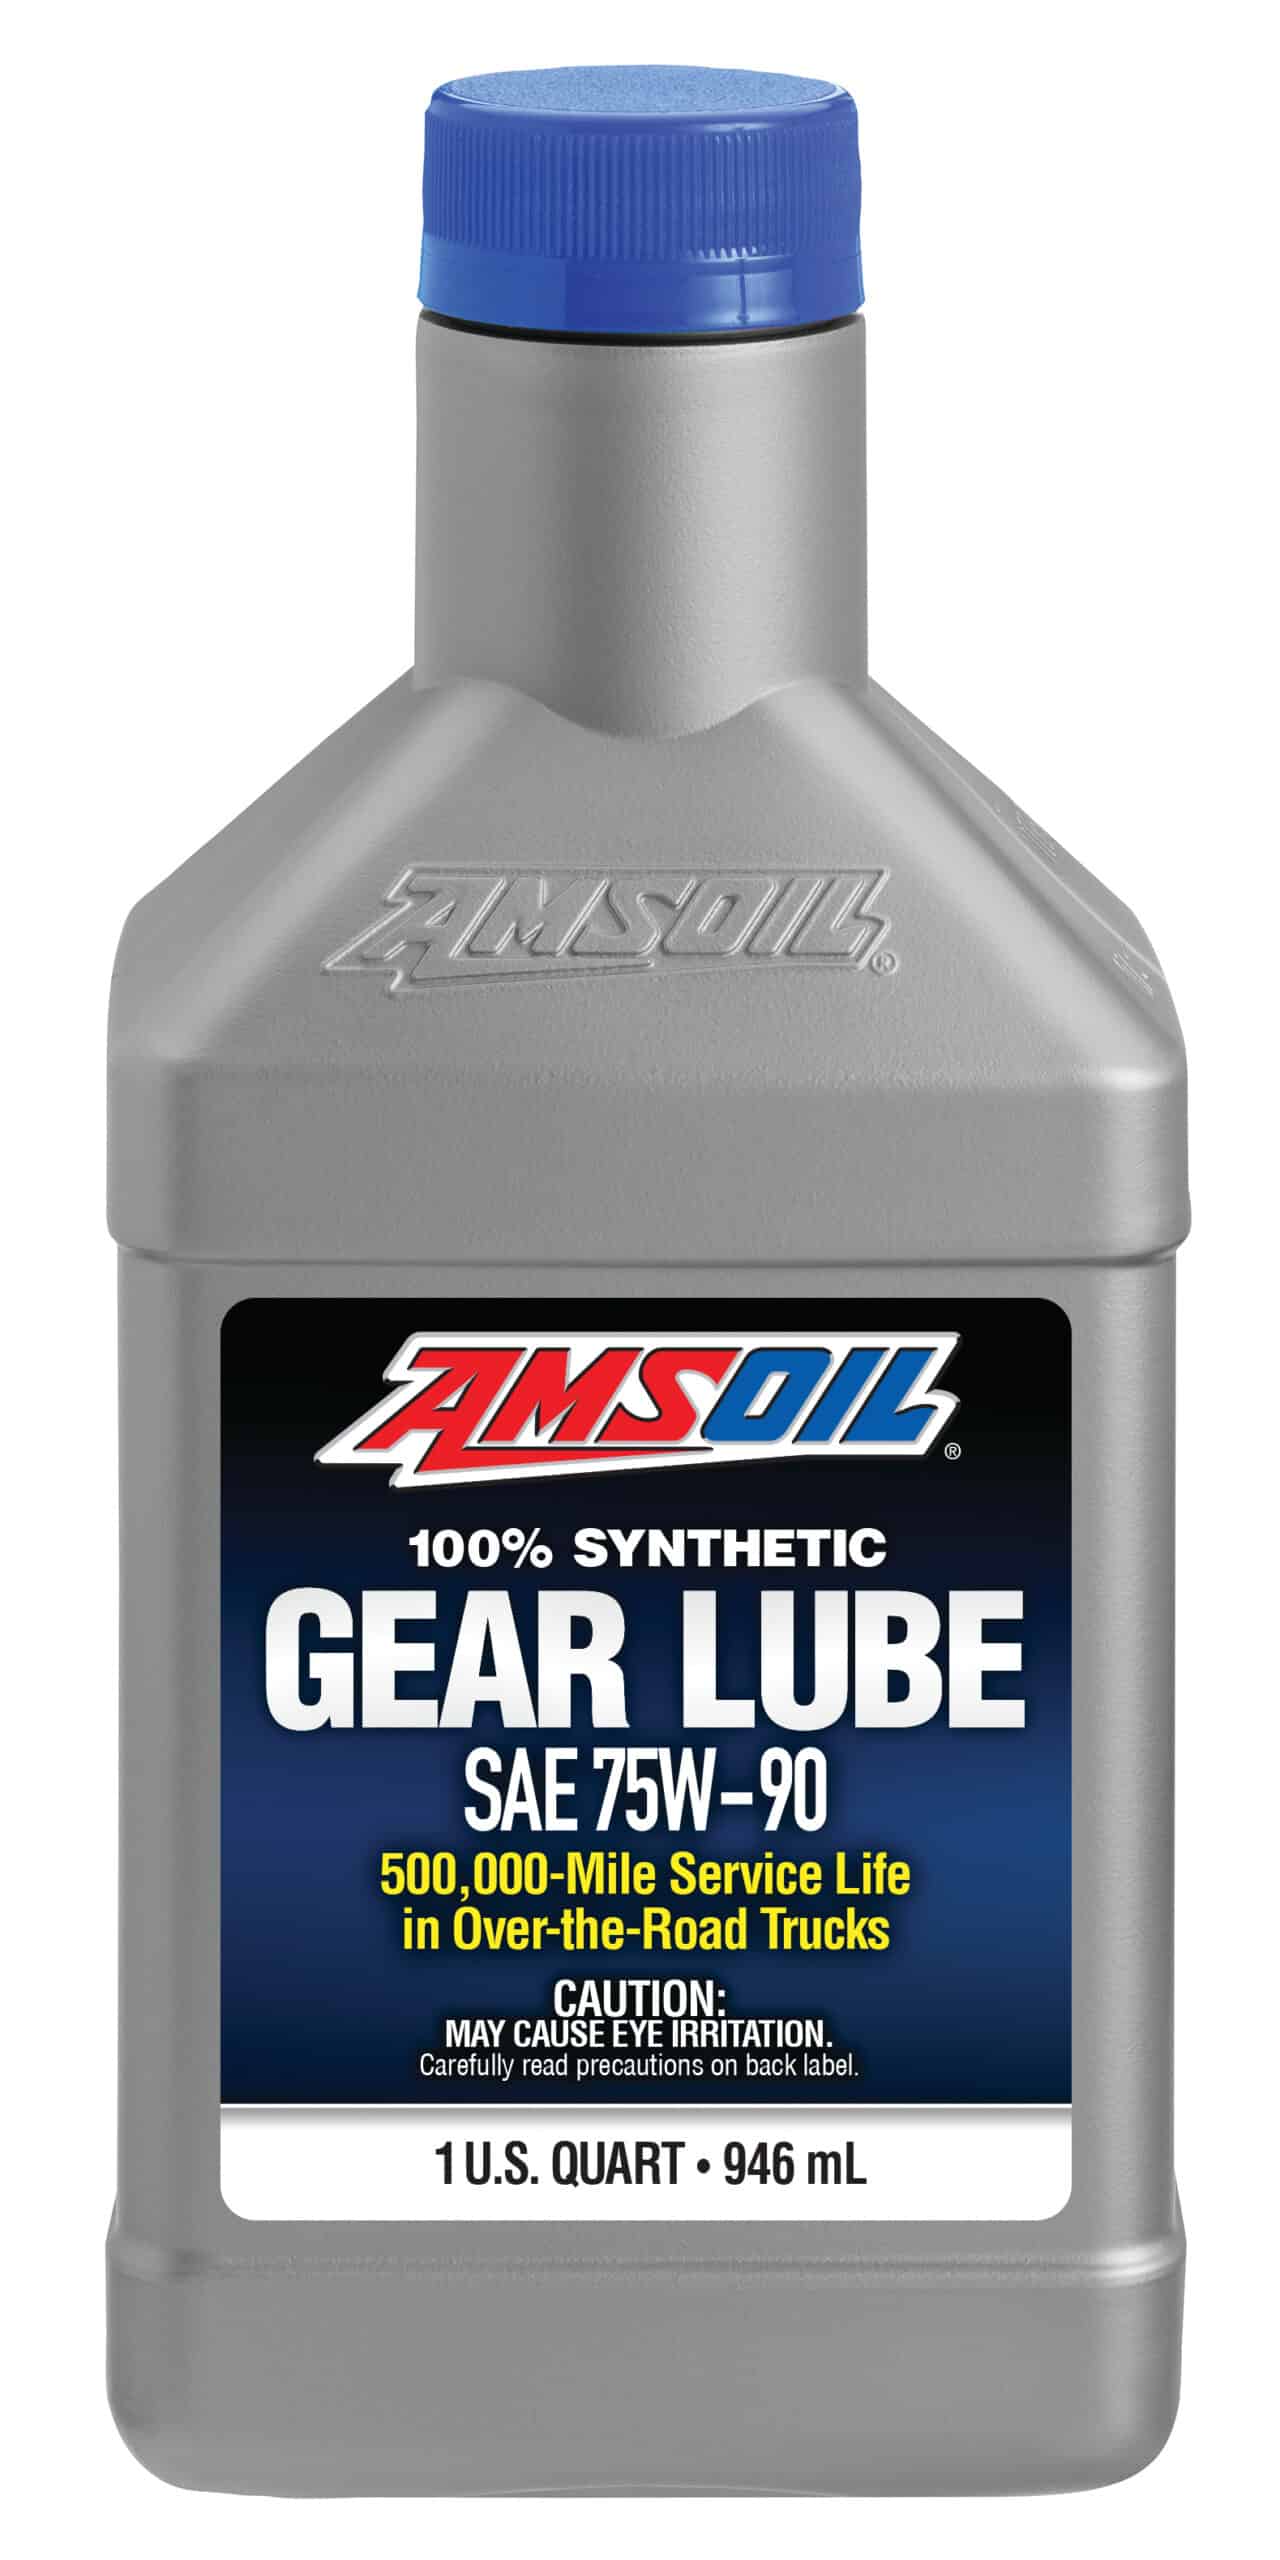 A bottle of AMSOIL Synthetic Gear Lube - an extended-drain gear lube engineered to last several times longer & protect gears better than conventional gear oils.